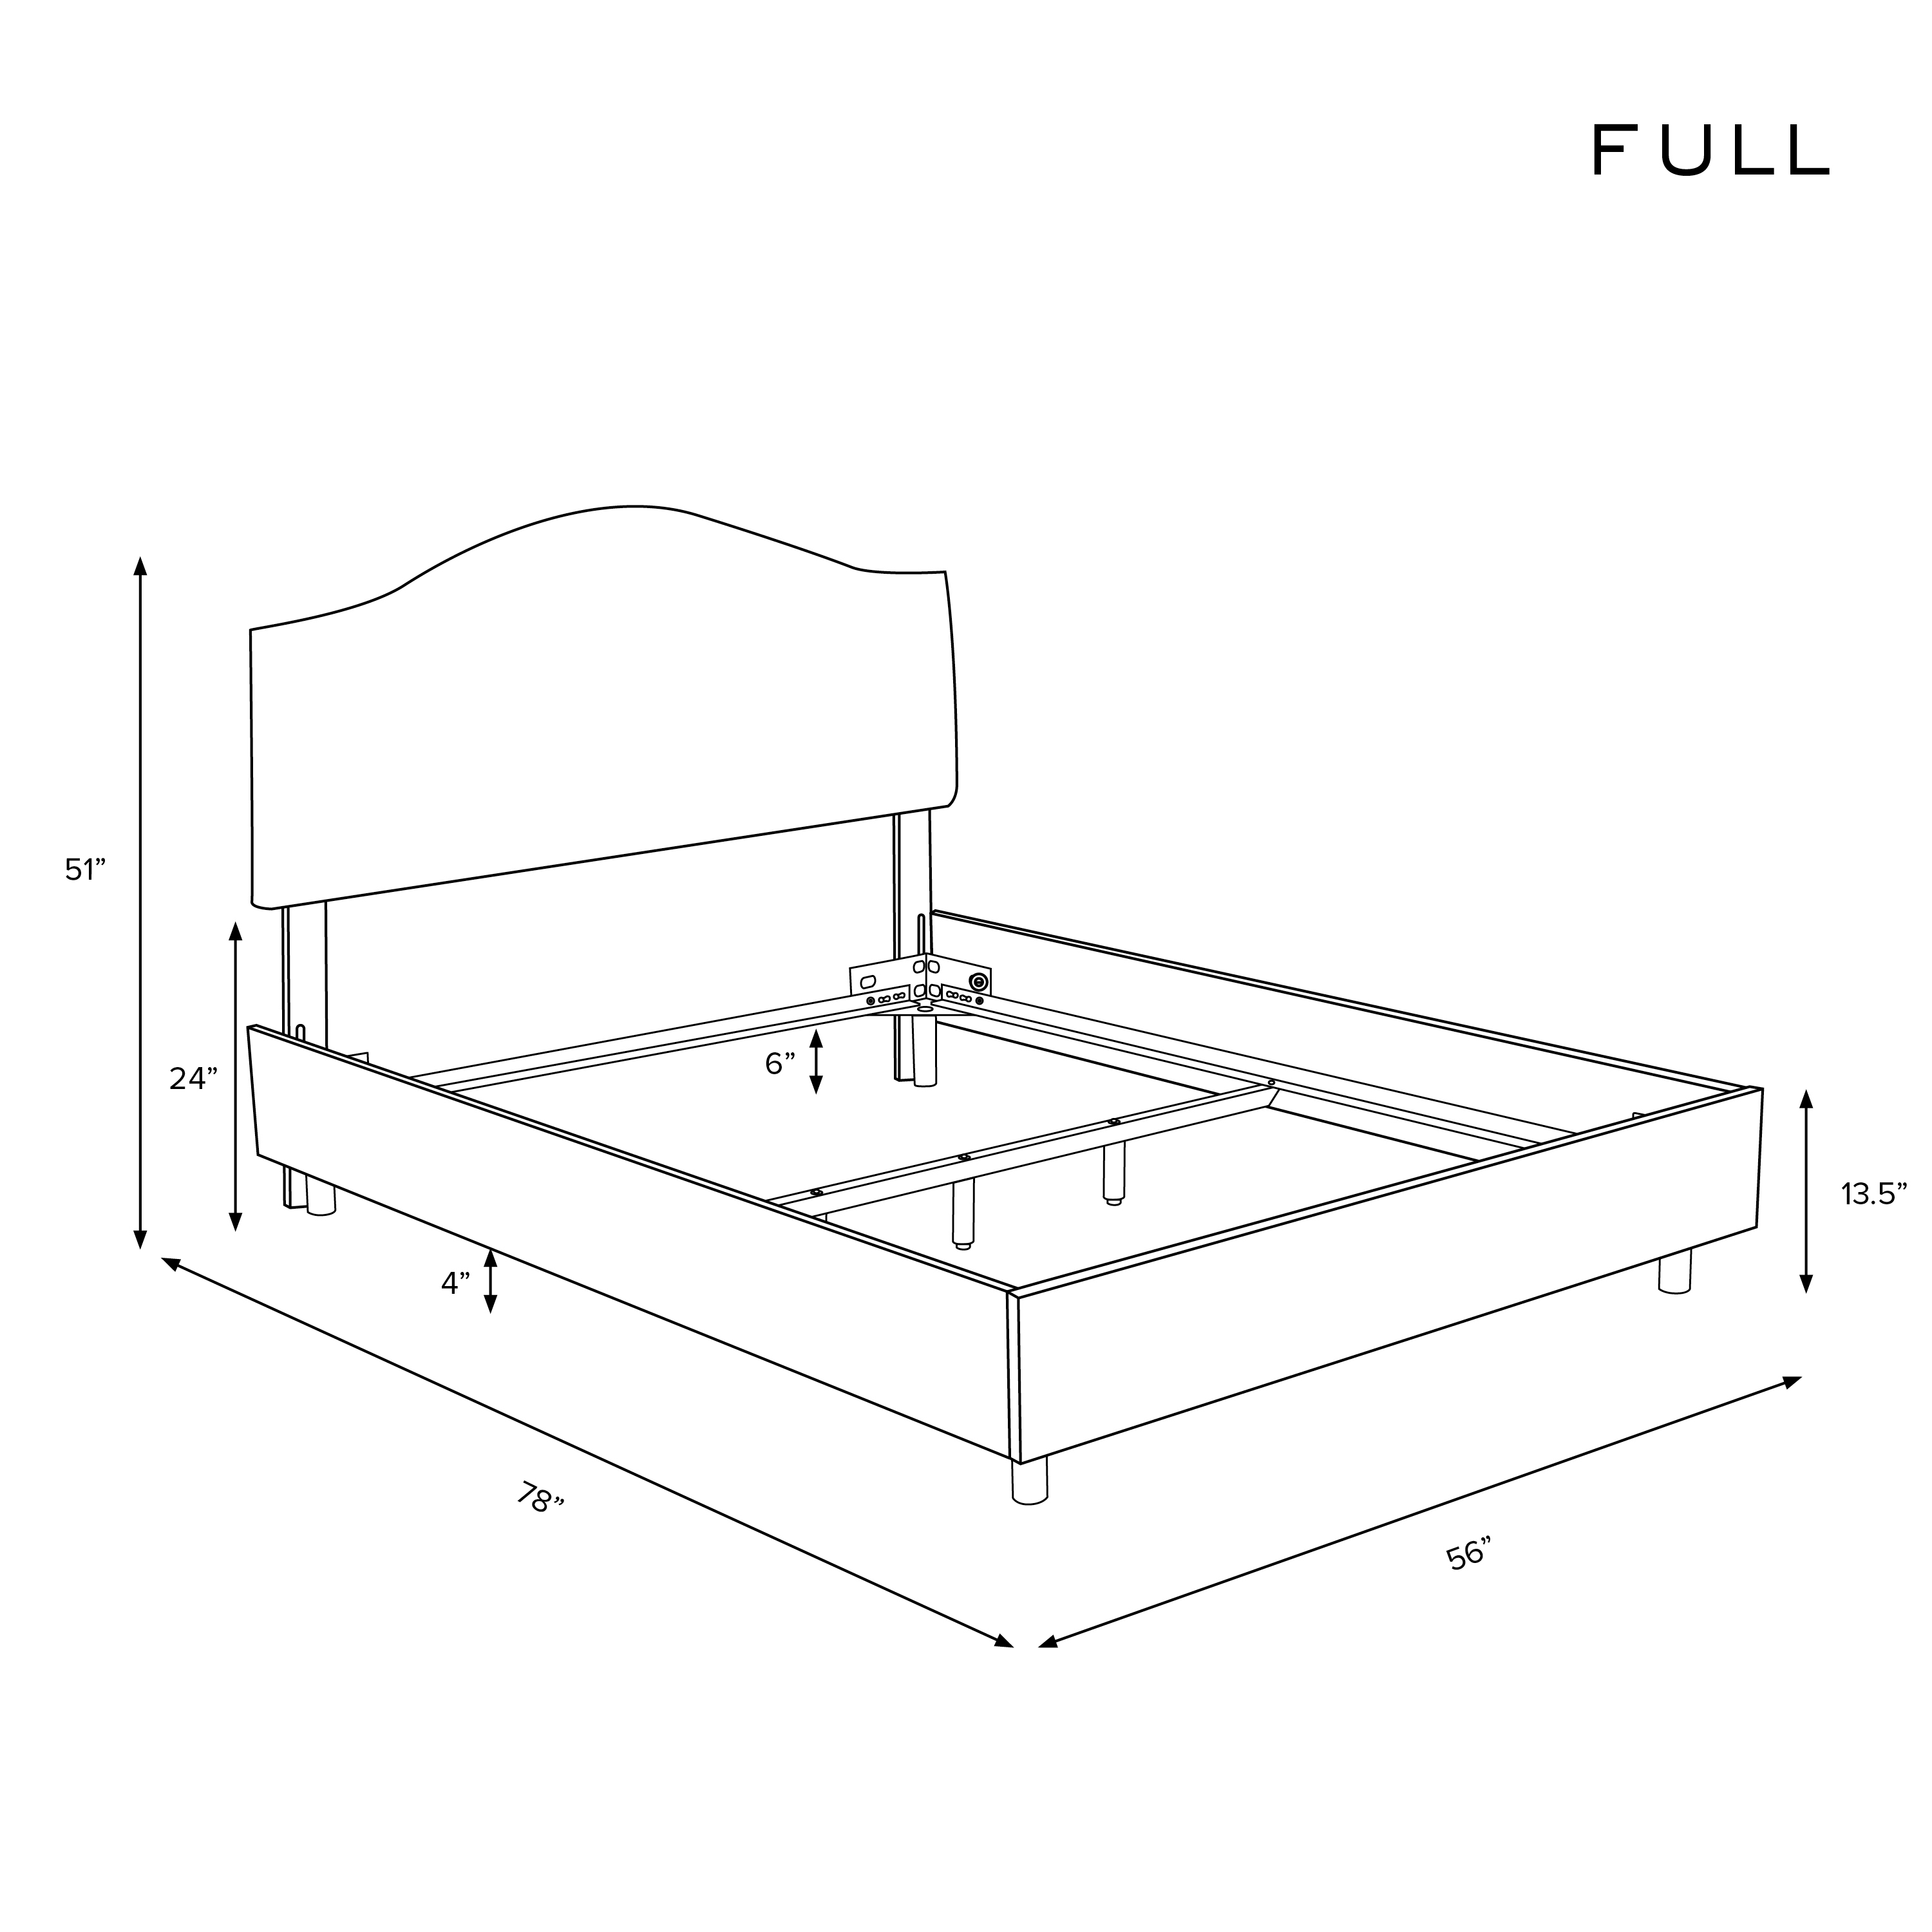 Full Kenmore Bed in Zuma Pumice - Image 5